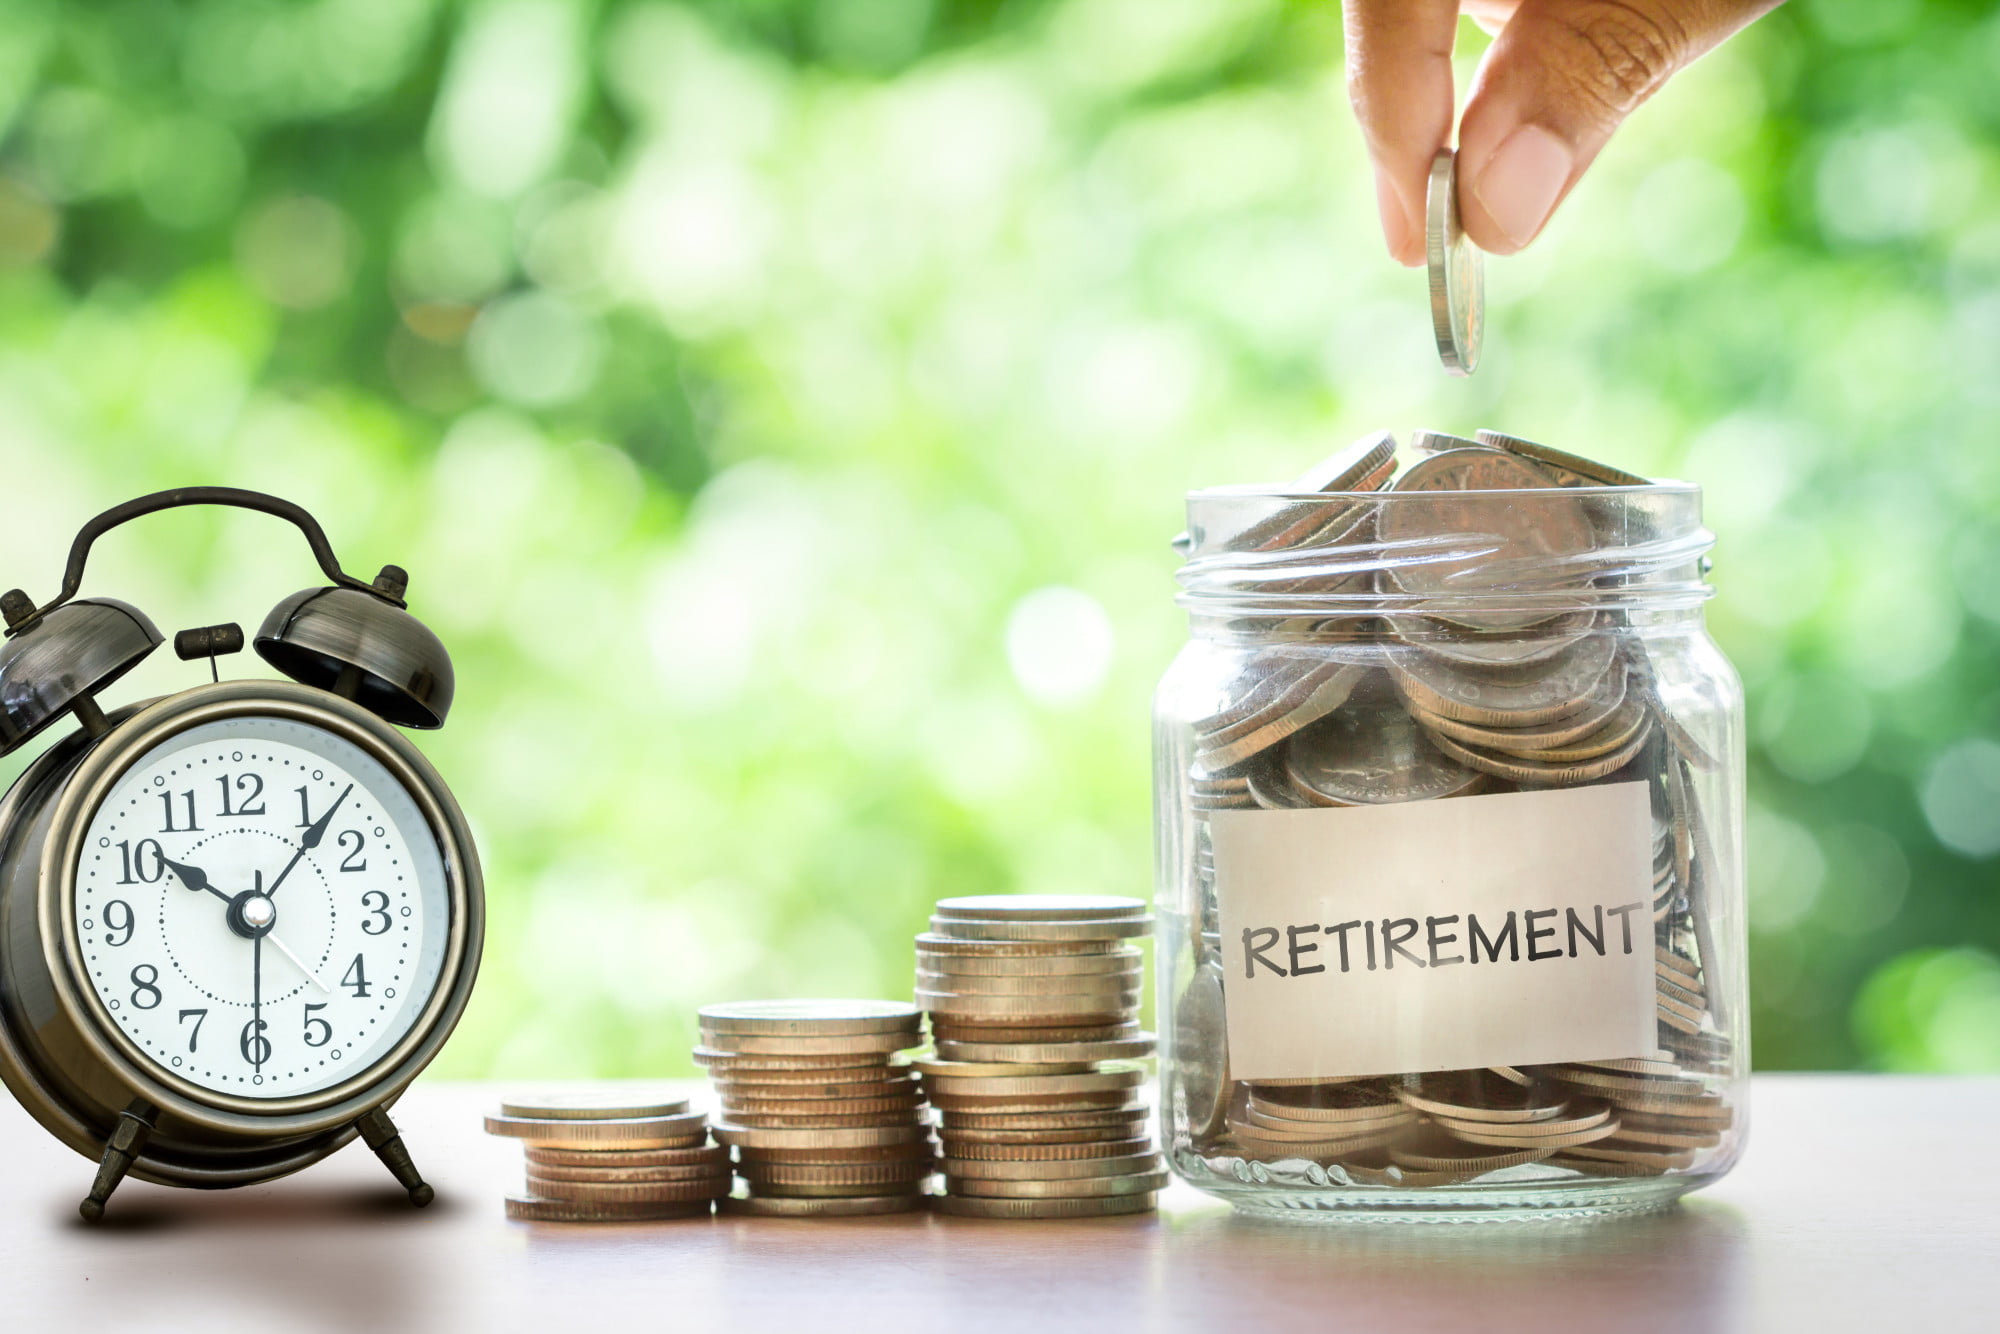 Early retirement is possible. Yes, even for you if you take all the right steps. Read on to discover expert tips to retire early here.